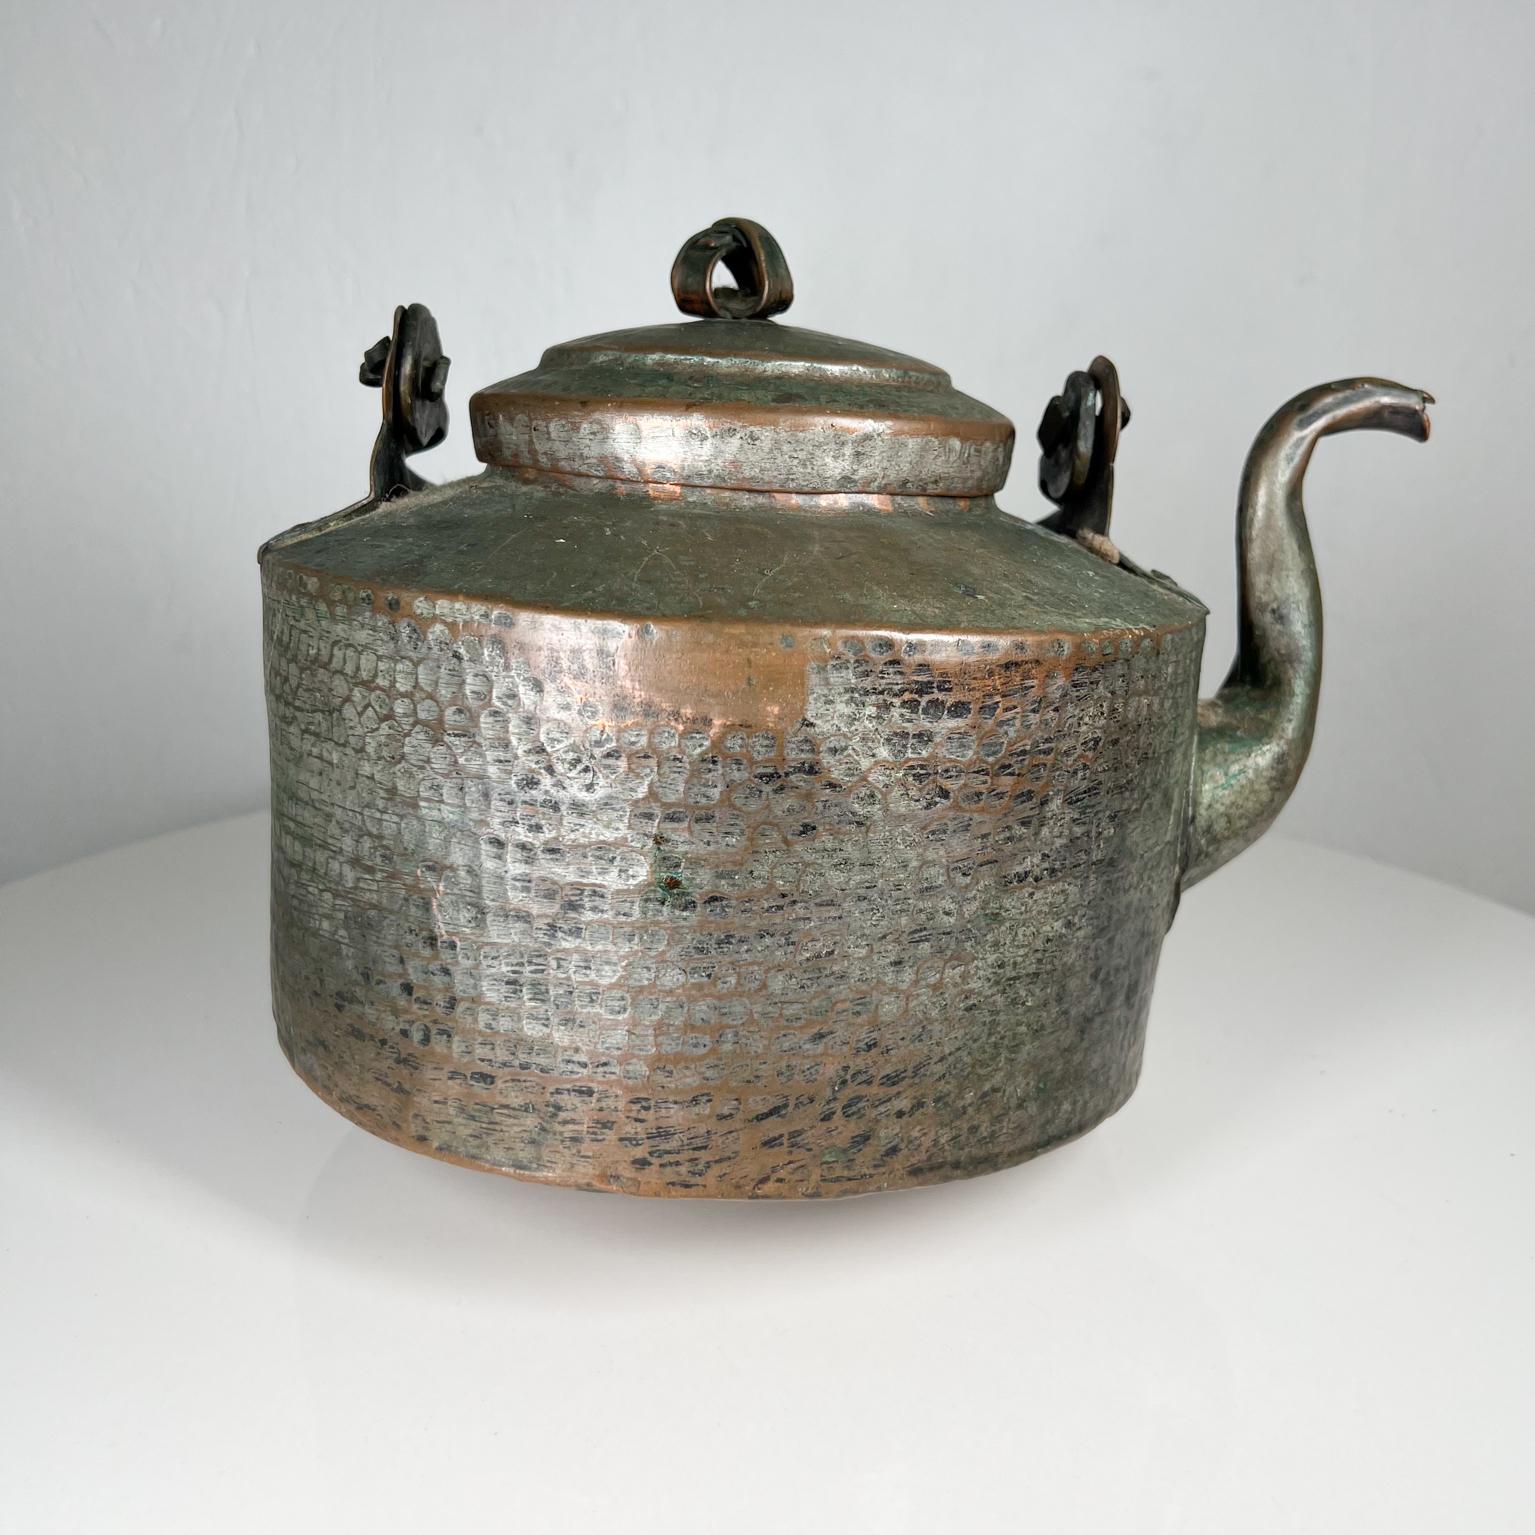 Antique Rustic Hammered copper tea kettle with flair
Measures: 11 D x 9 W x 11.5 H
Preowned unrestored vintage antique condition.
Refer to images listed please.